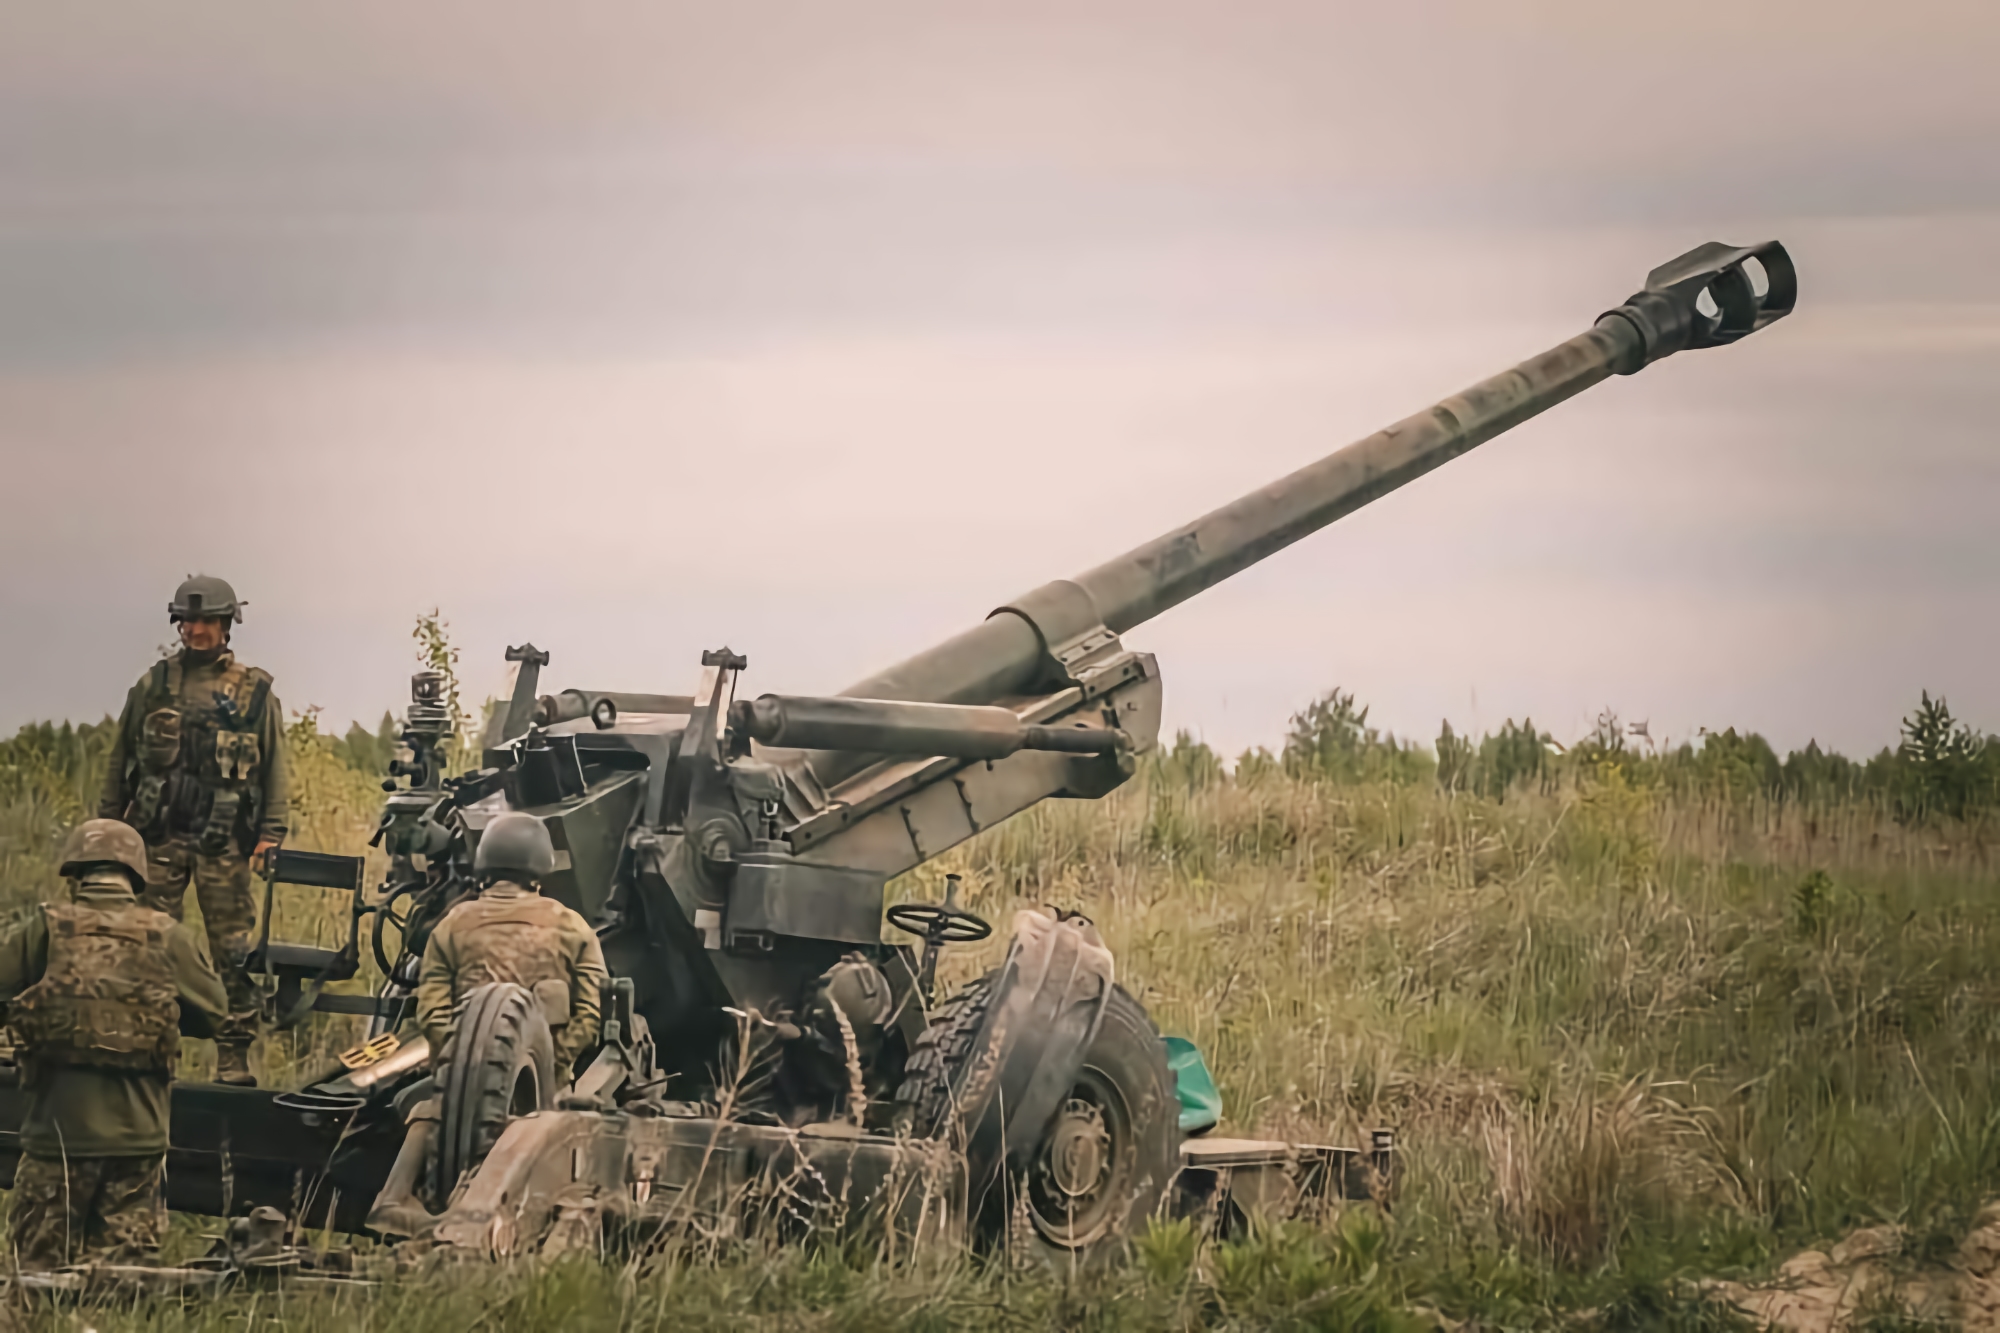 The 155mm FH70 howitzers donated by Italy are already destroying Russian fighters at the front